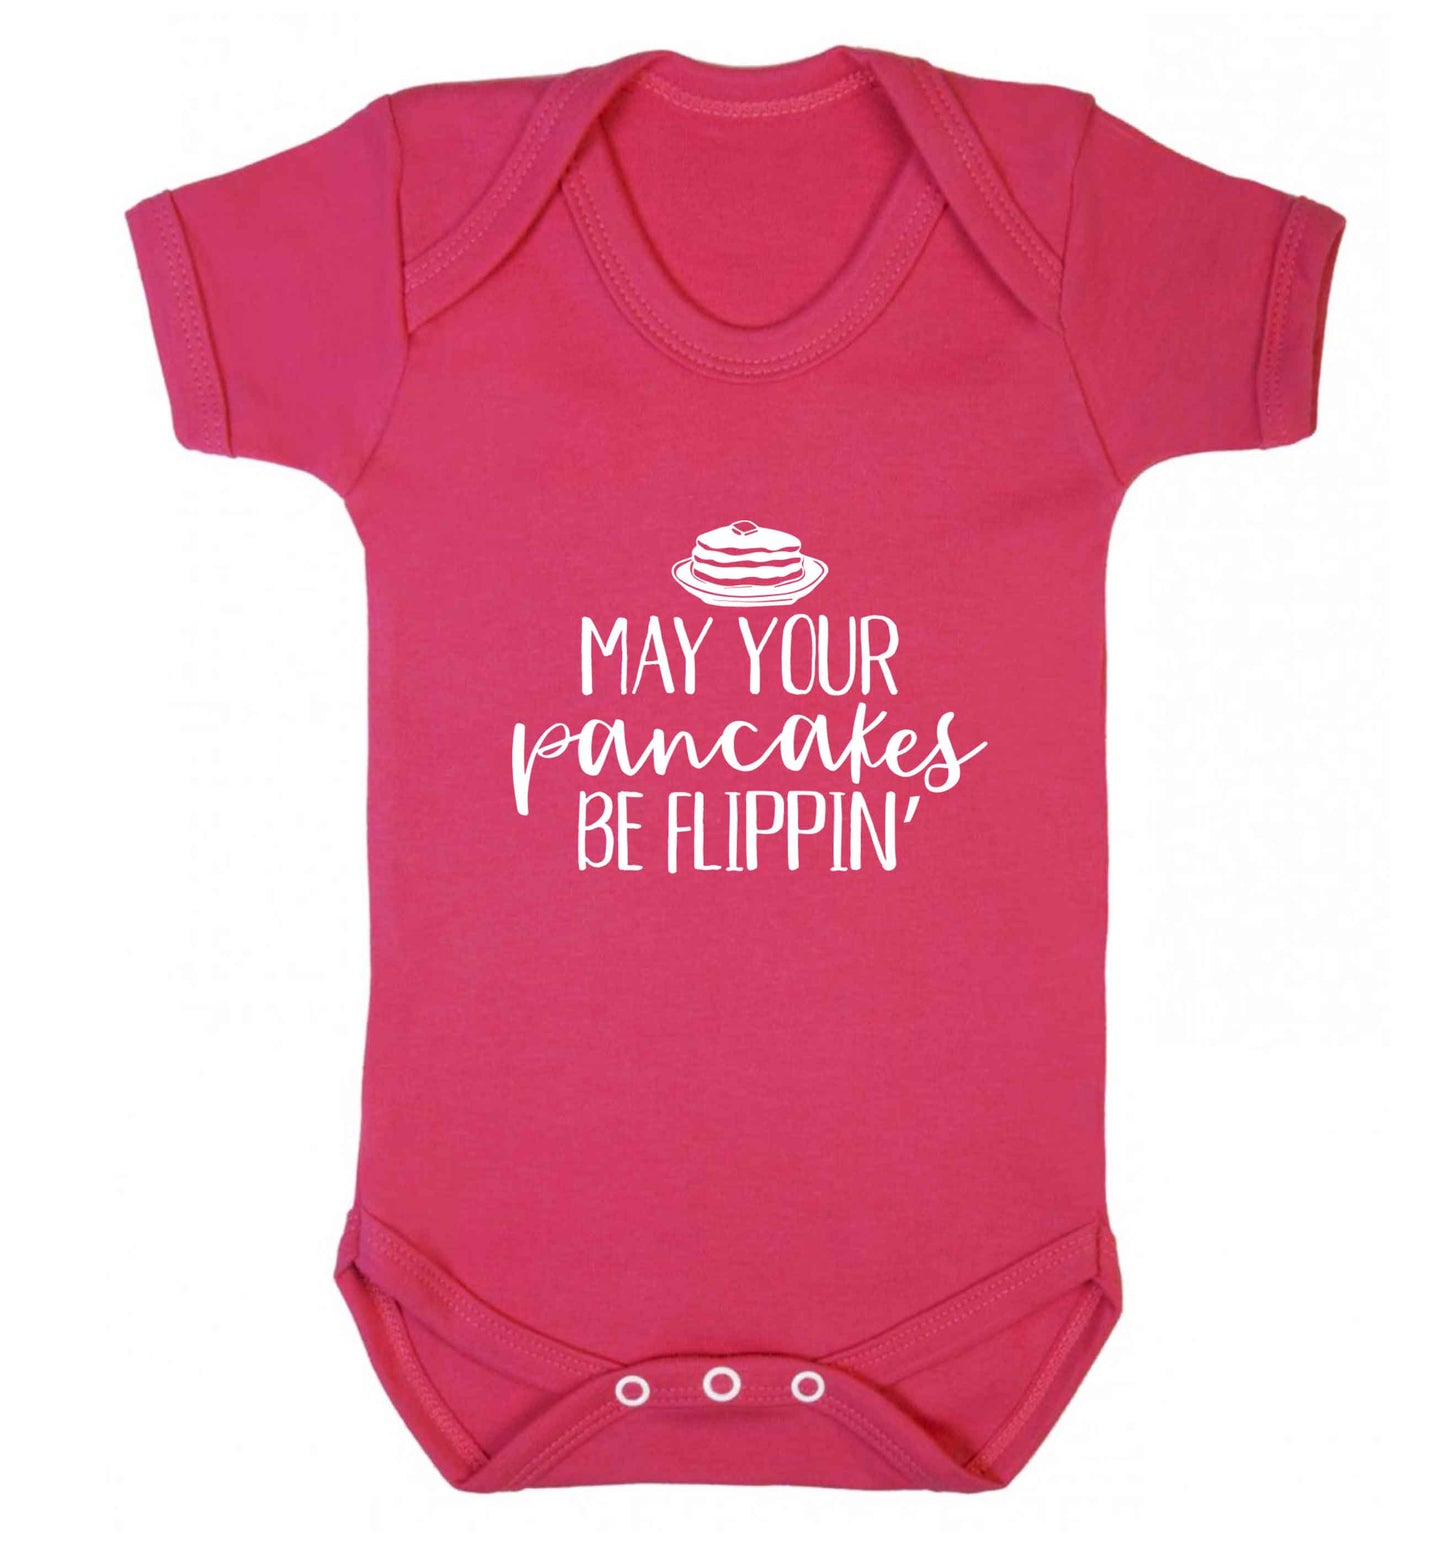 May your pancakes be flippin' baby vest dark pink 18-24 months